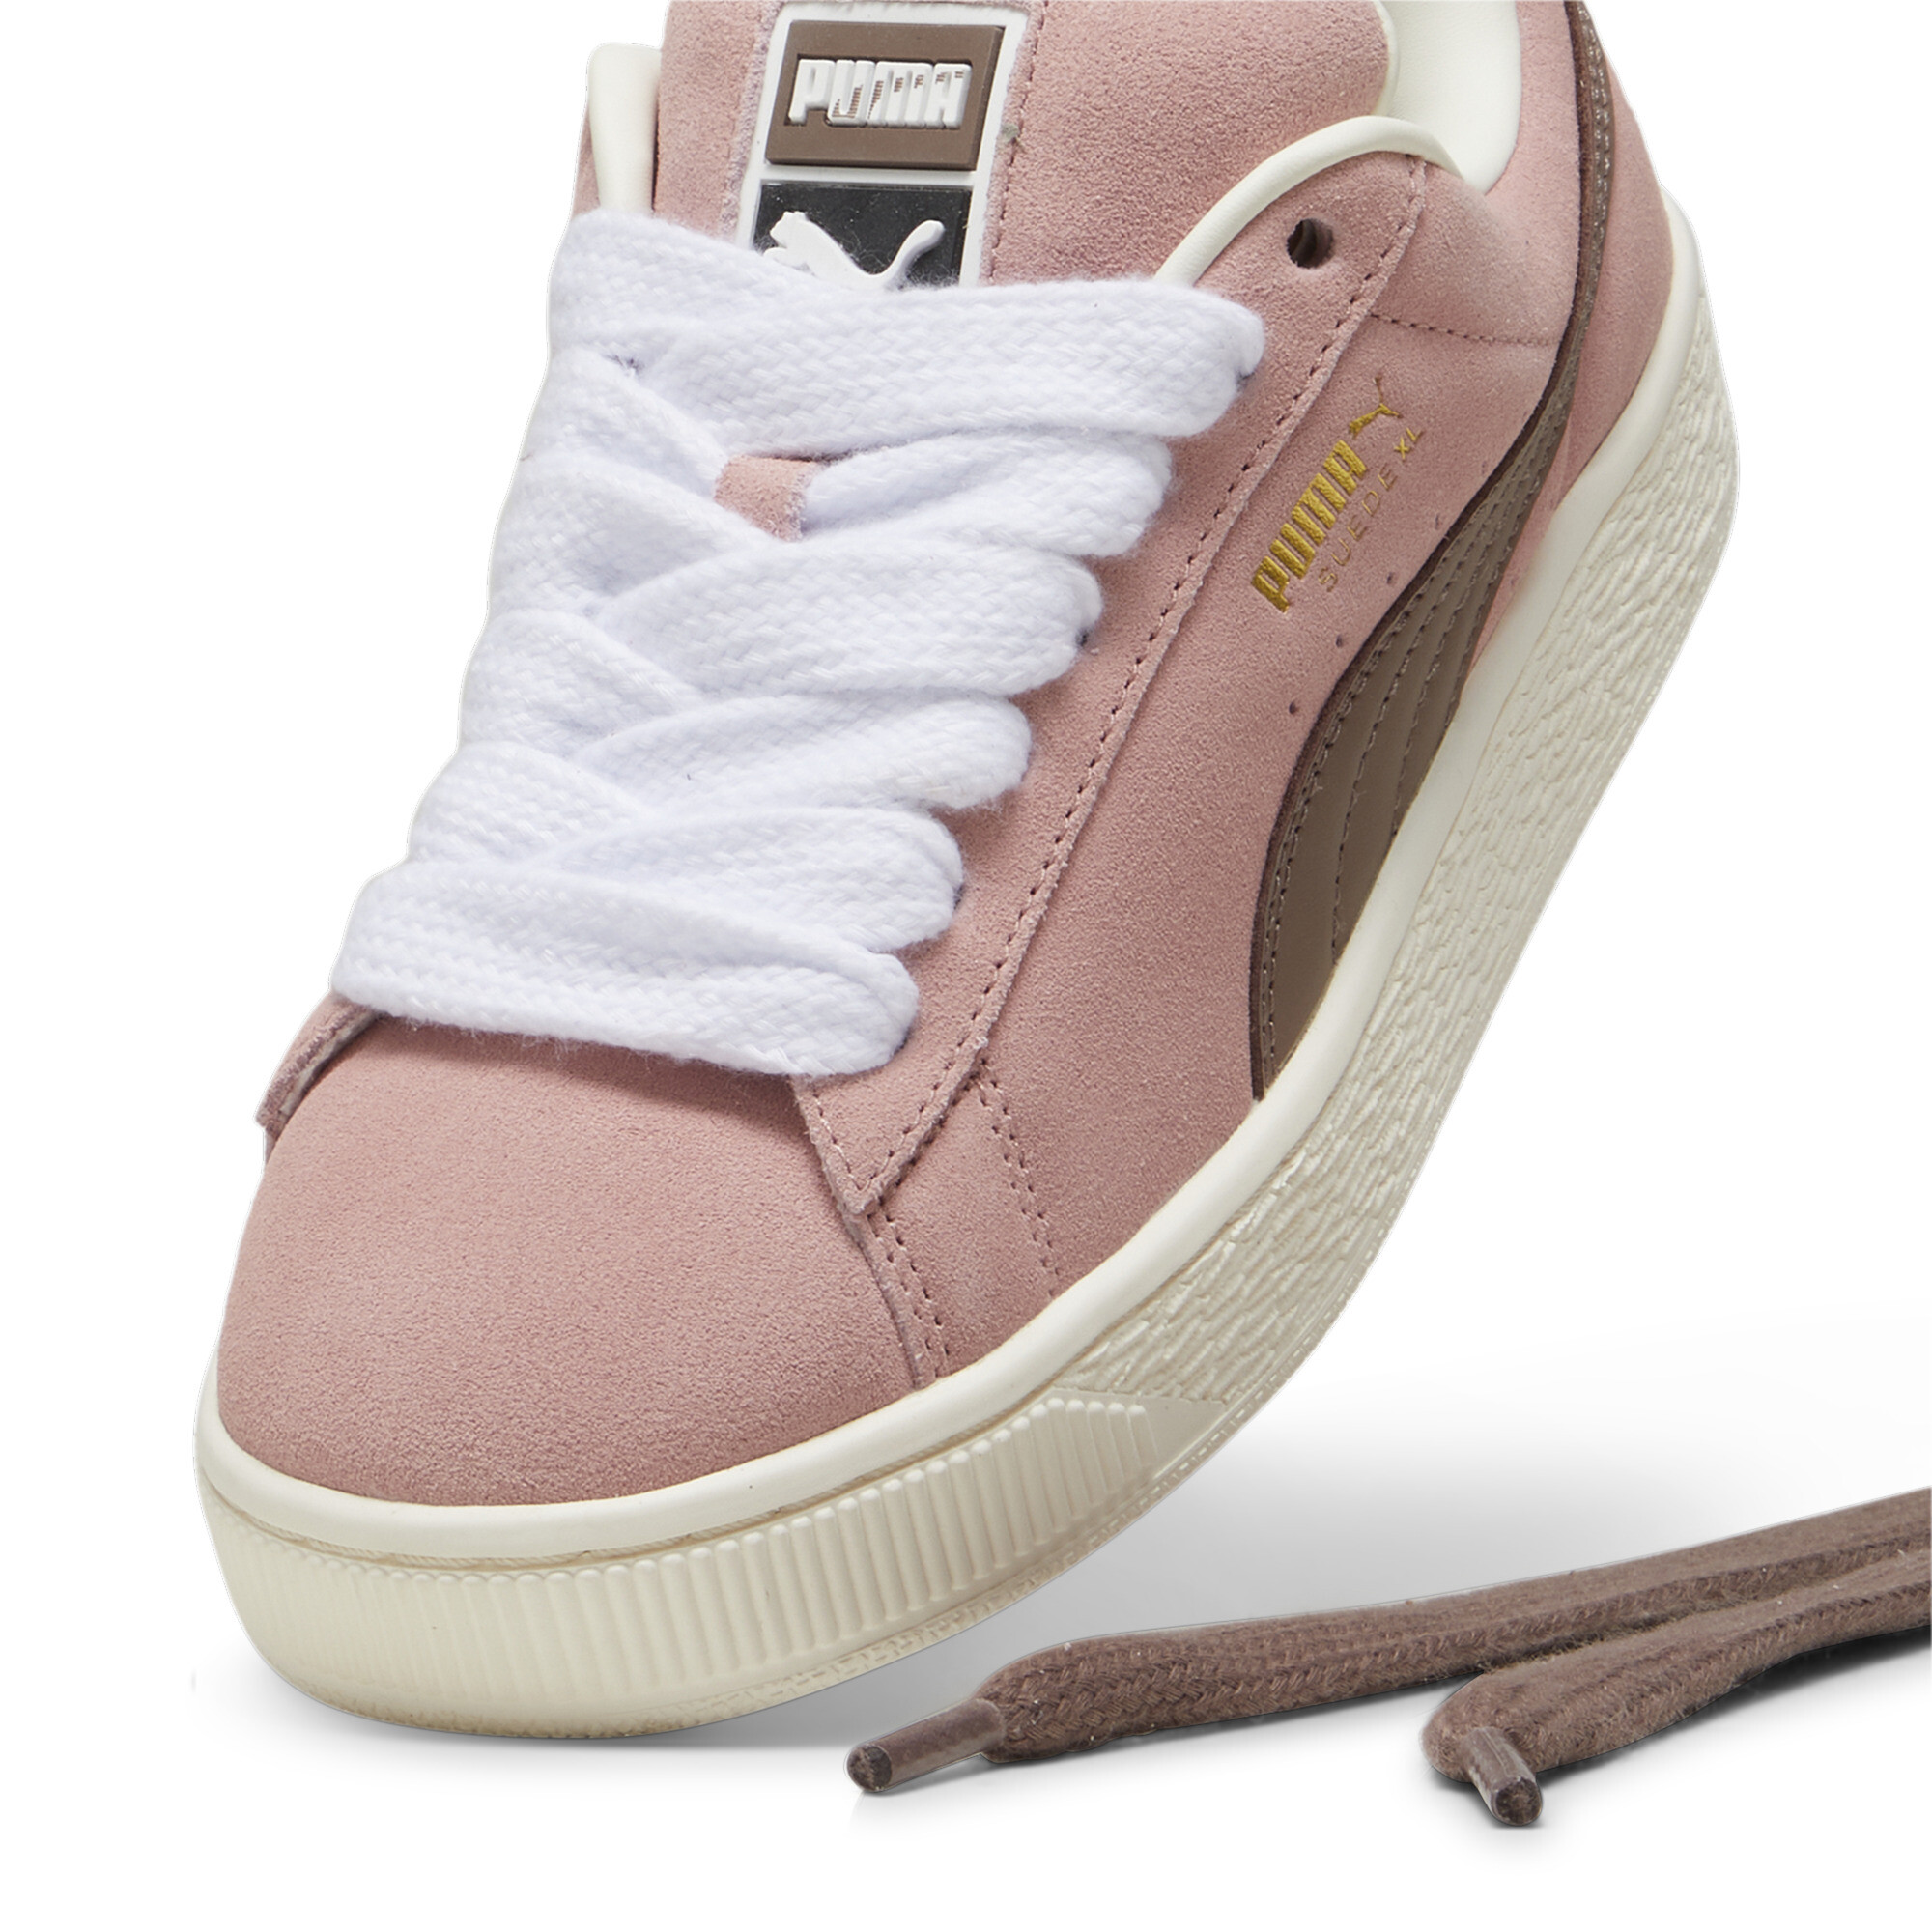 Puma Suede XL Sneakers Unisex, Pink, Size 40, Shoes